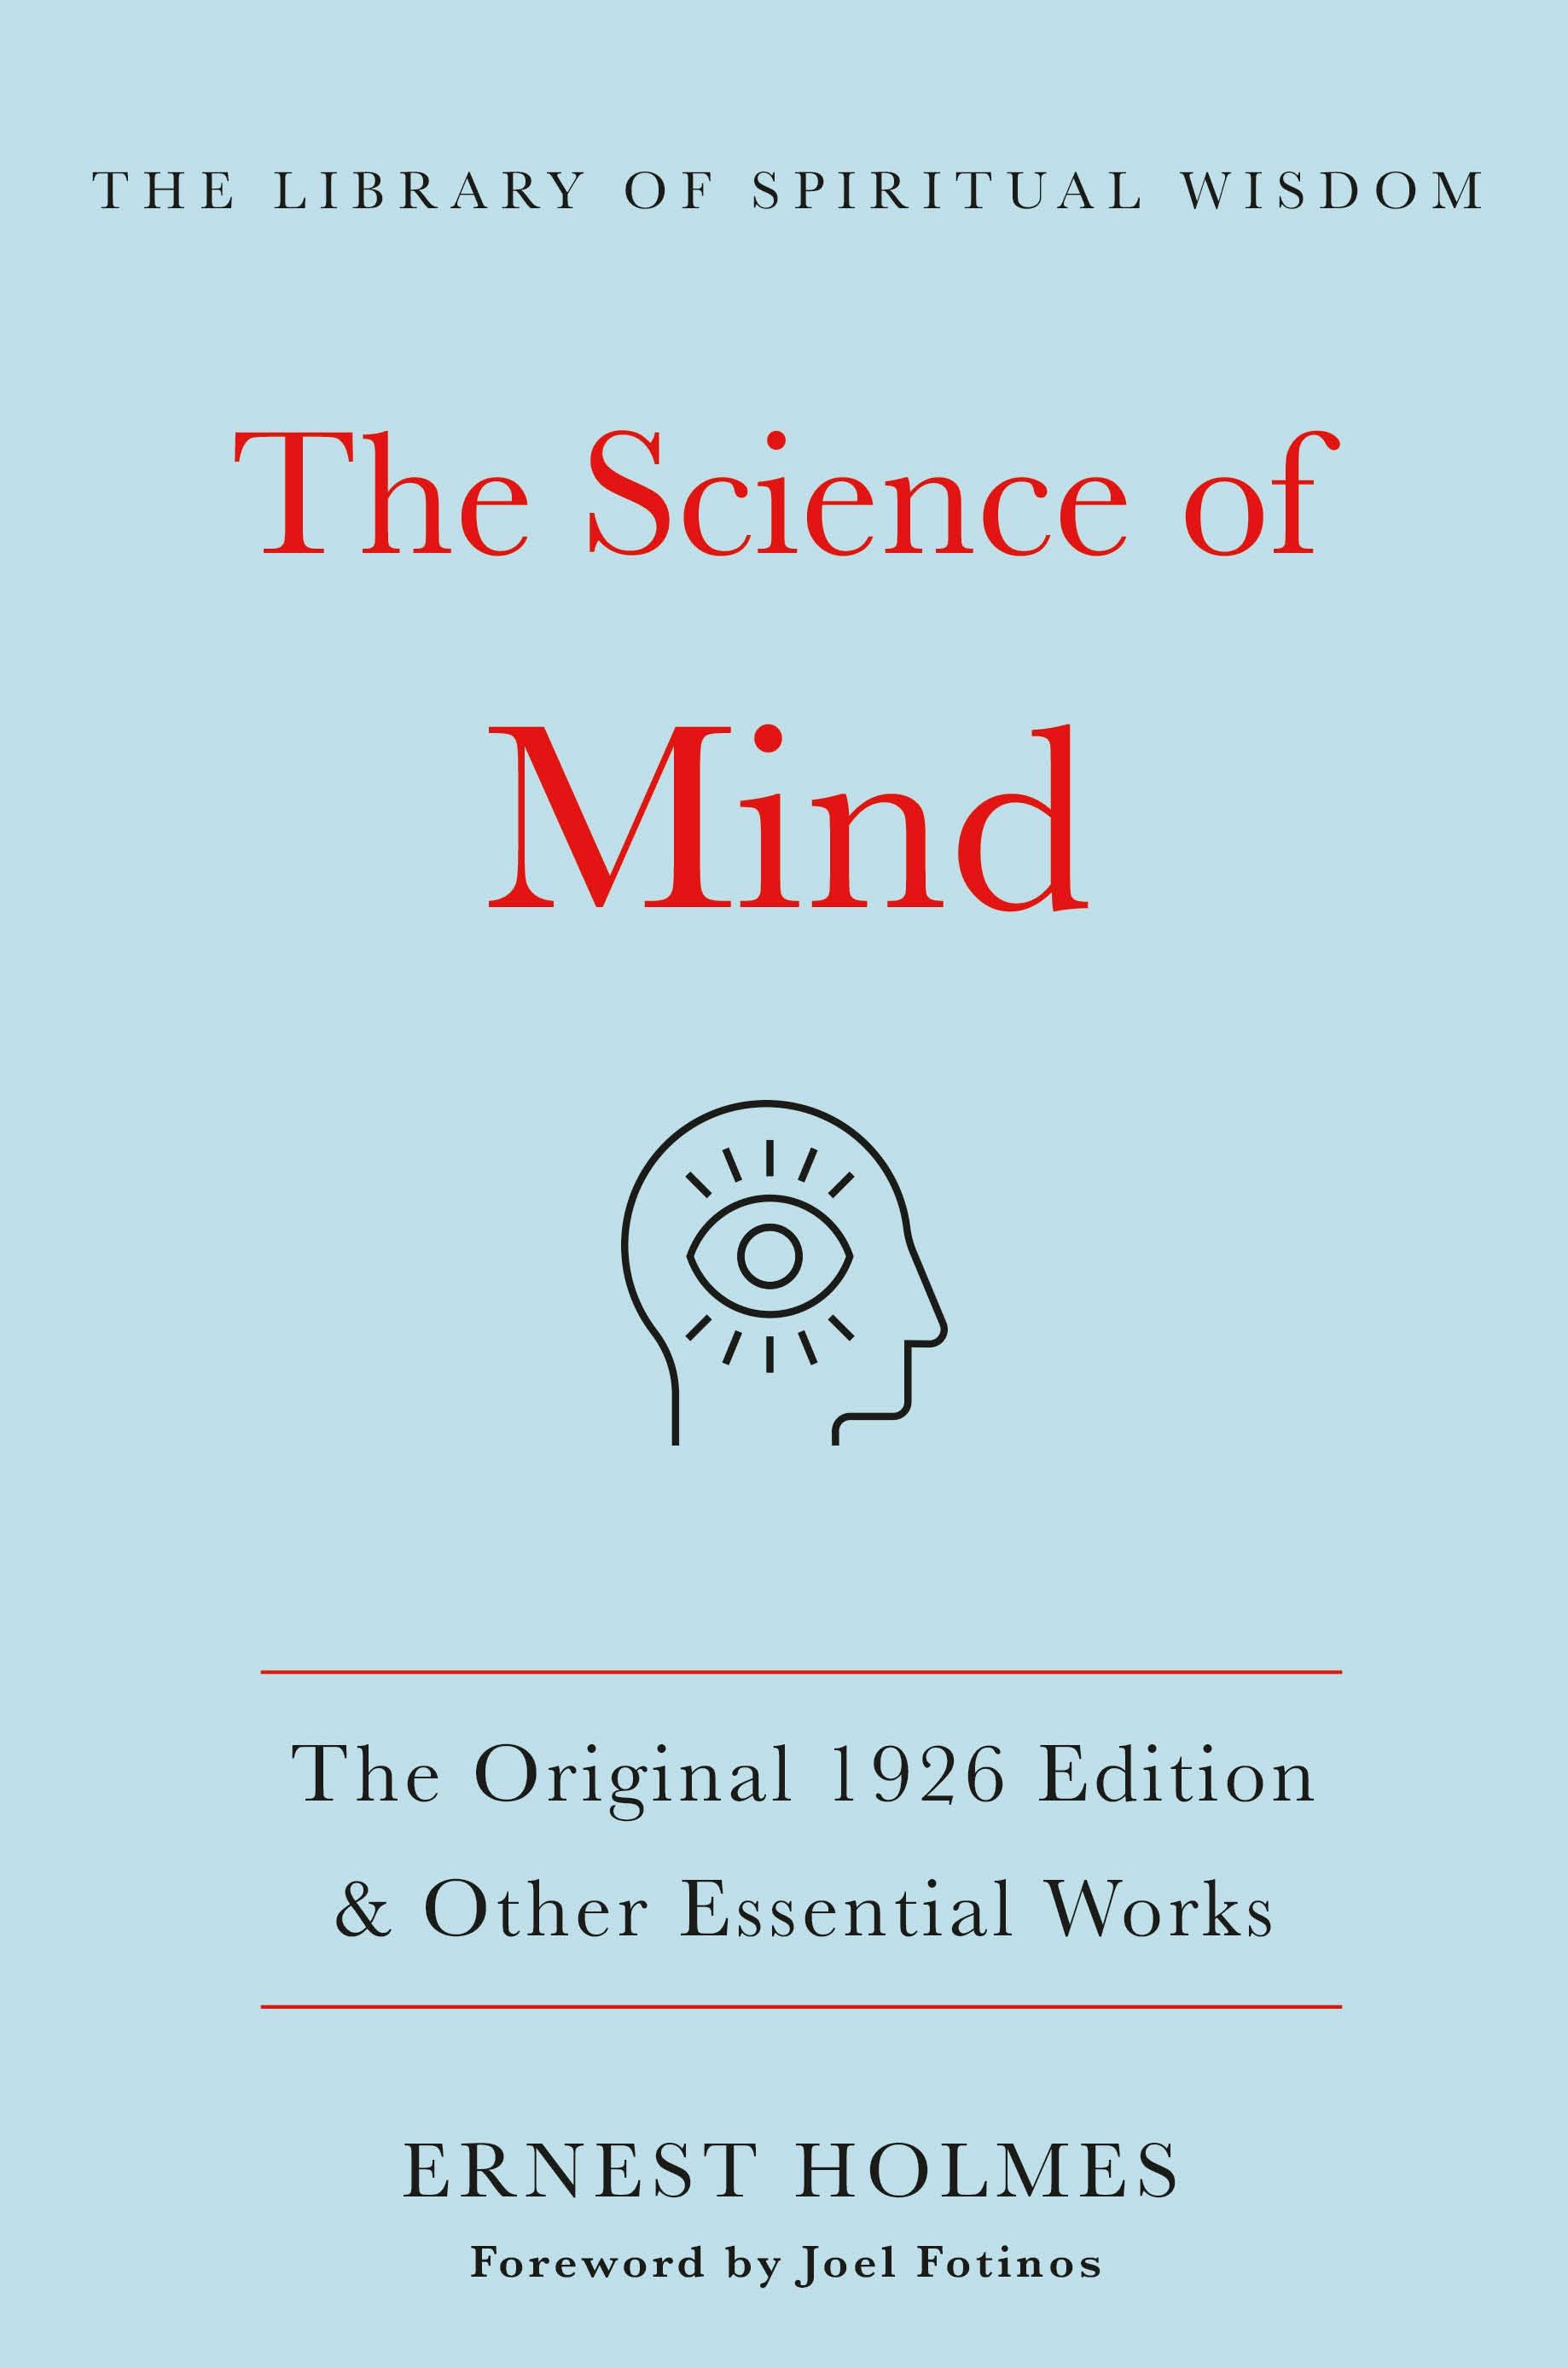 Describes for The Science of Mind:The Original 1926 Edition & Other Essential Works by authors